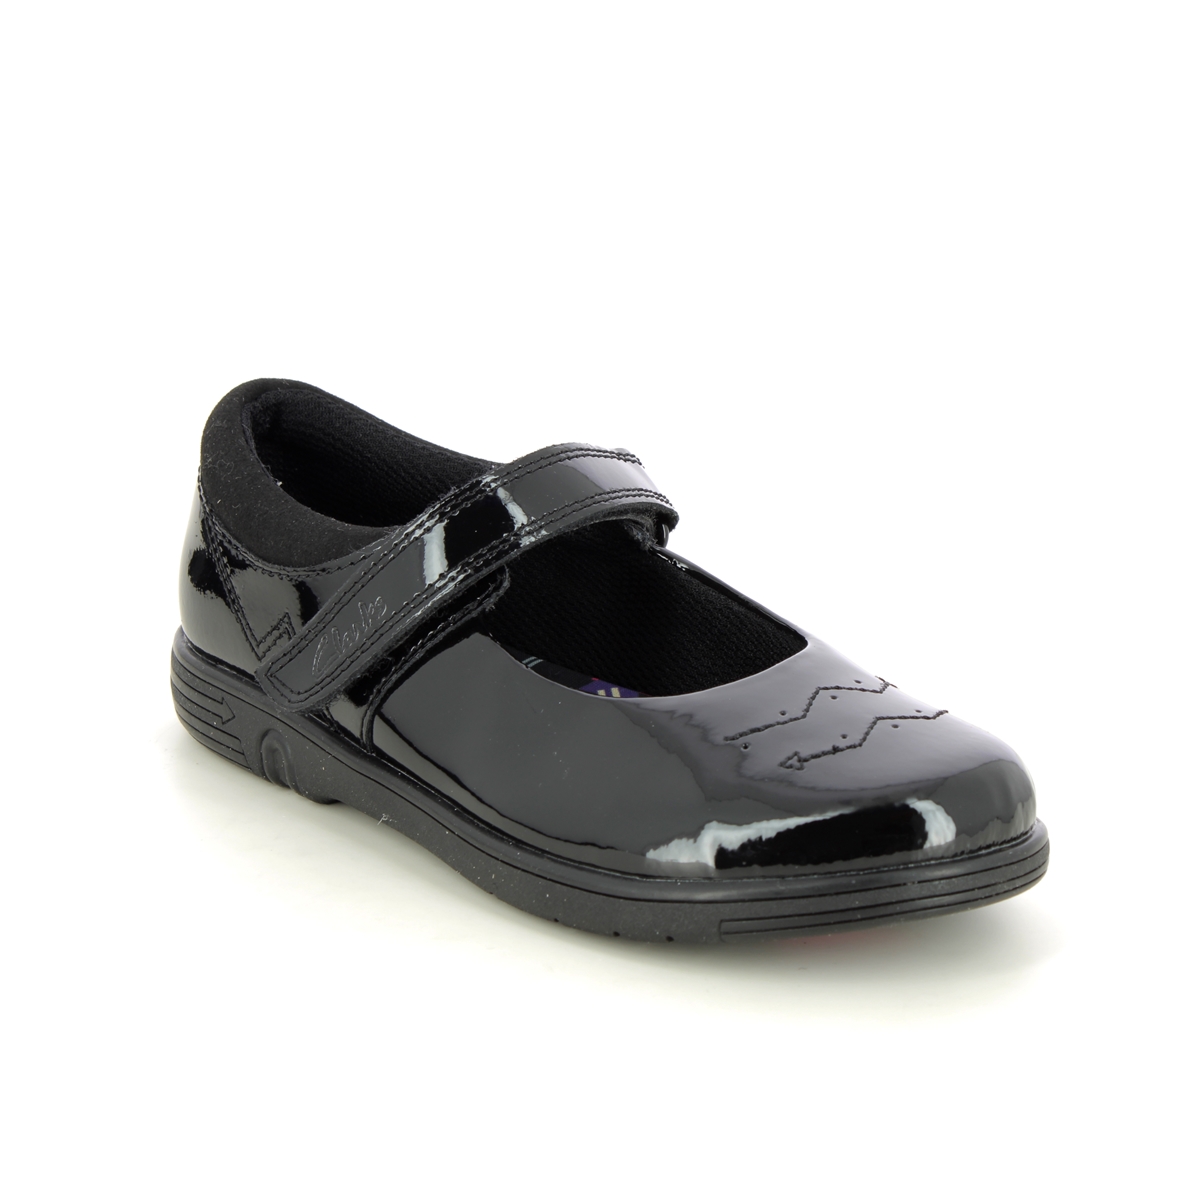 Clarks Jazzy Jig K Mary Jane Black Patent Kids Girls School Shoes 753086F In Size 1.5 In Plain Black Patent F Width Fitting Regular Fit For School For